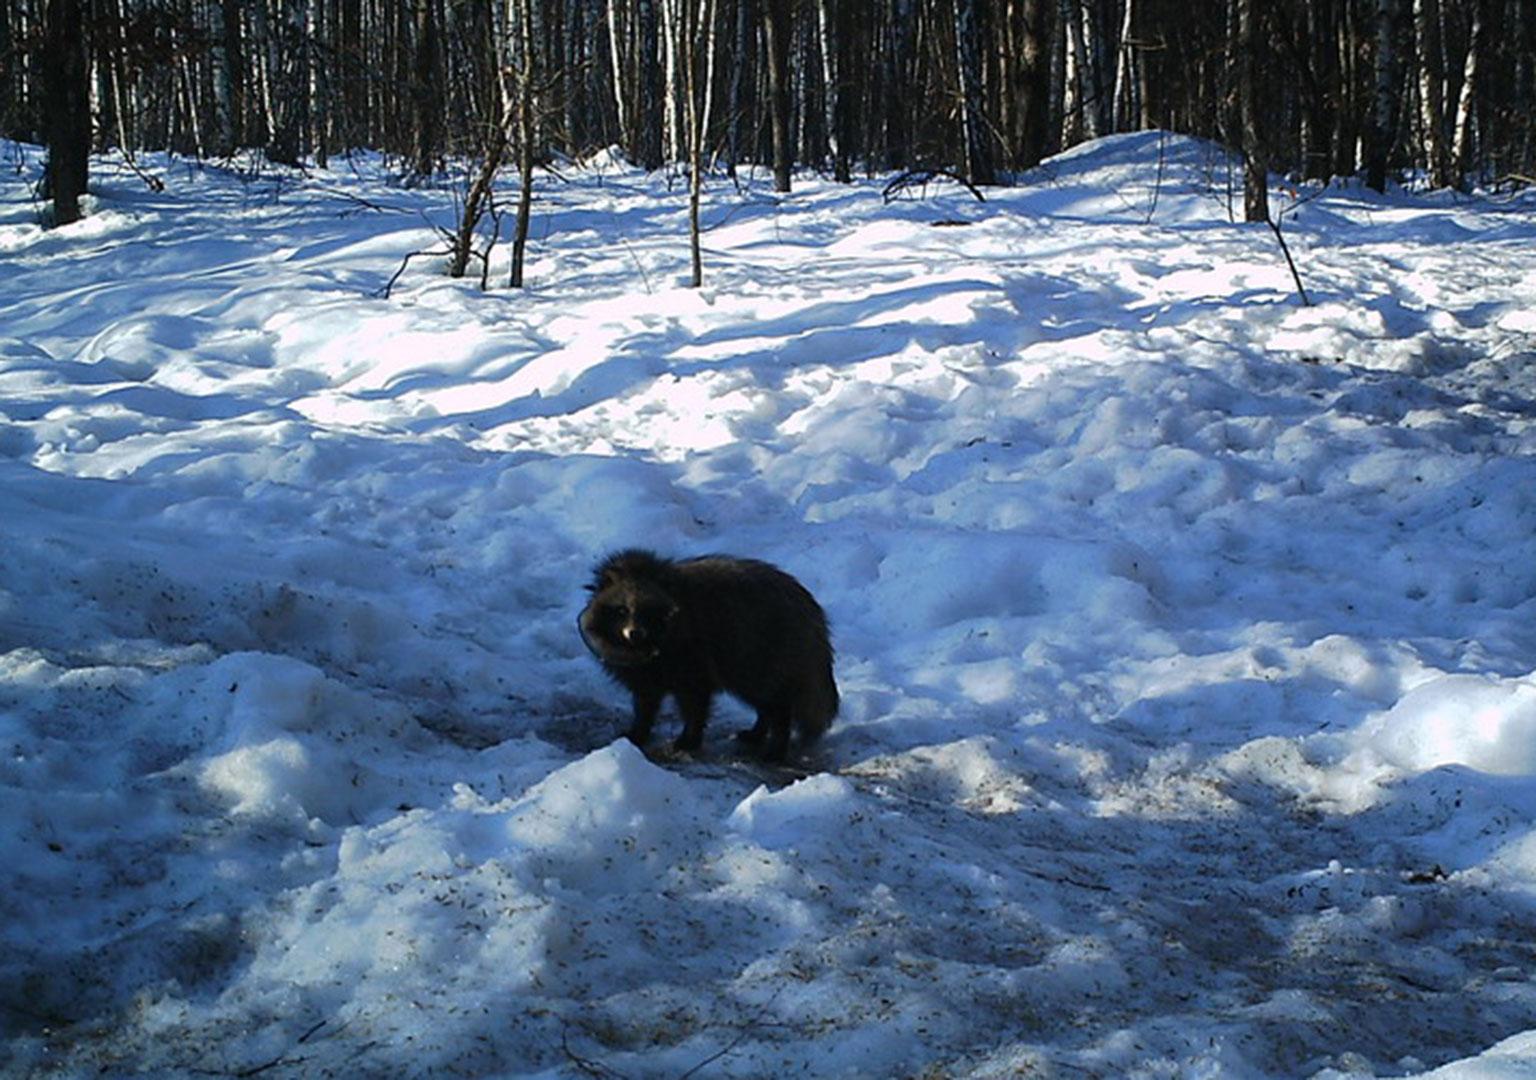 Racoon dog (Nyctereutes procyonoides)